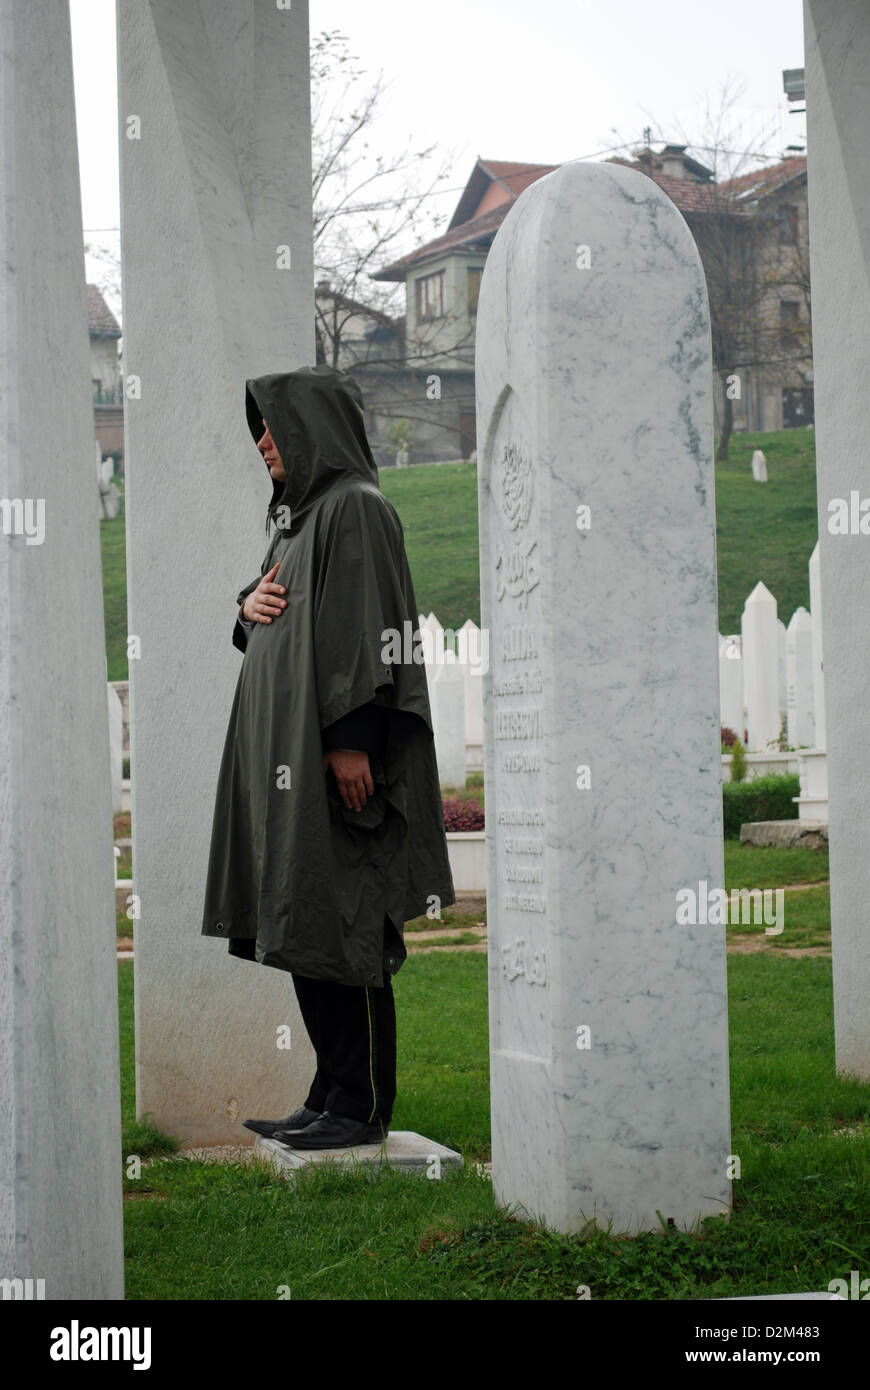 The grave of former Bosnian President Alija Izetbegović guarded by a soldier. The grave was damaged by a bomb attack in 2006. Stock Photo